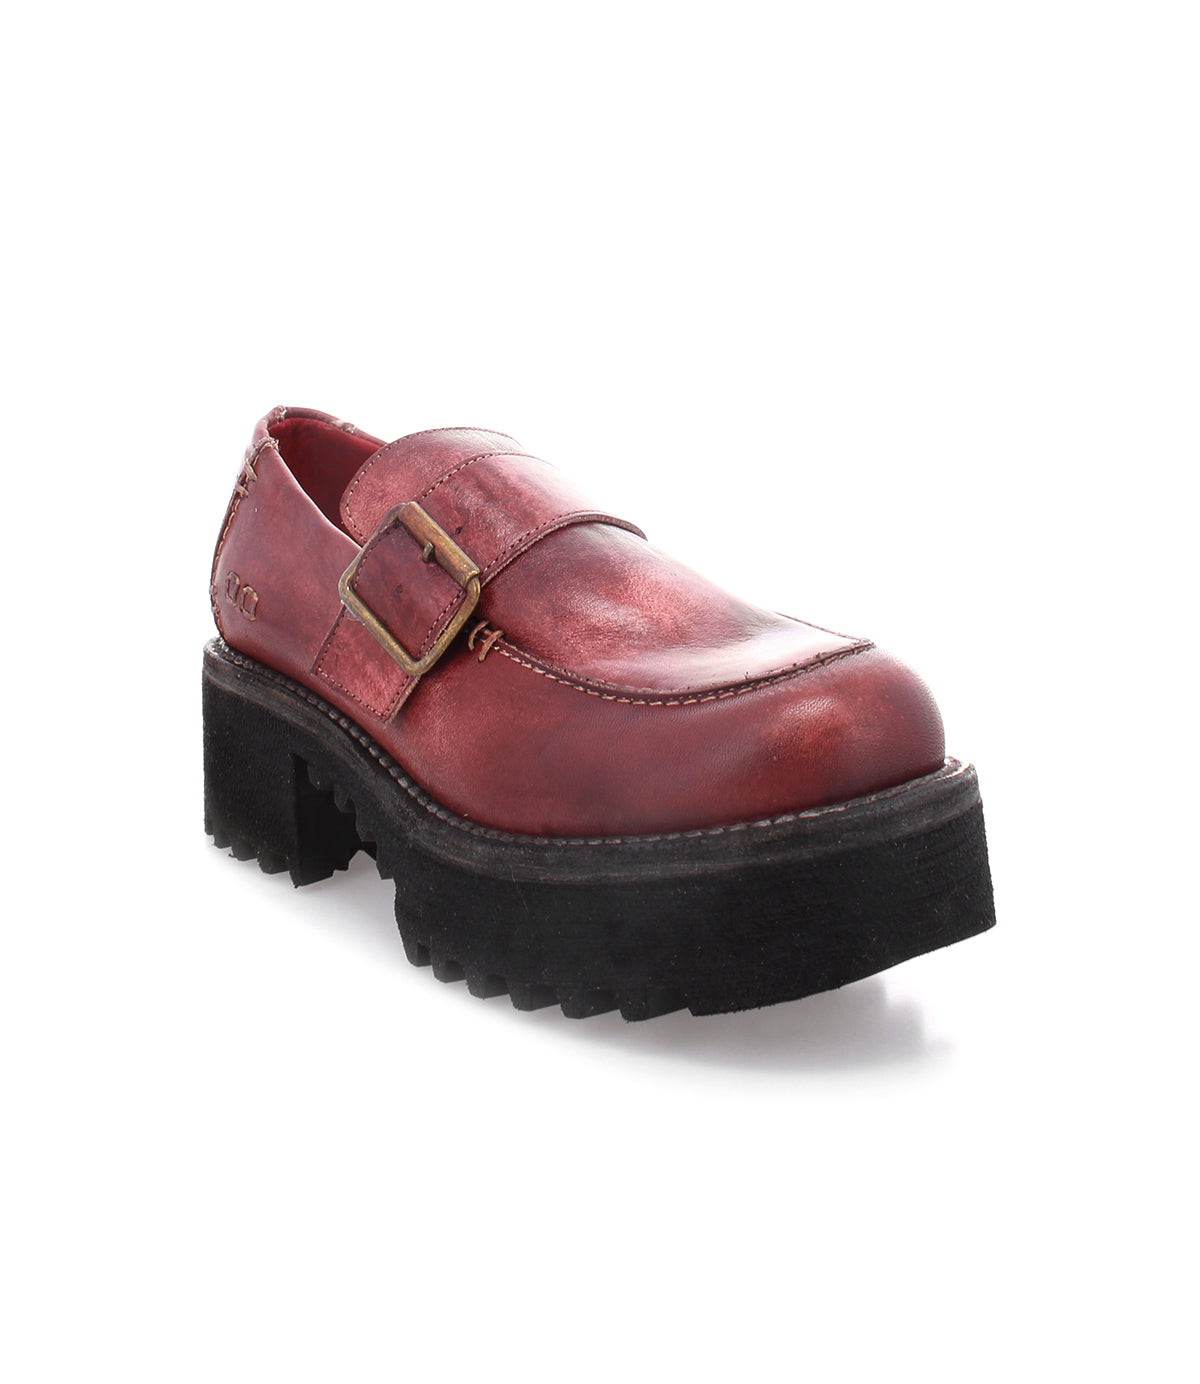 A comfortable women's Bed Stu leather loafer for fall fashion.